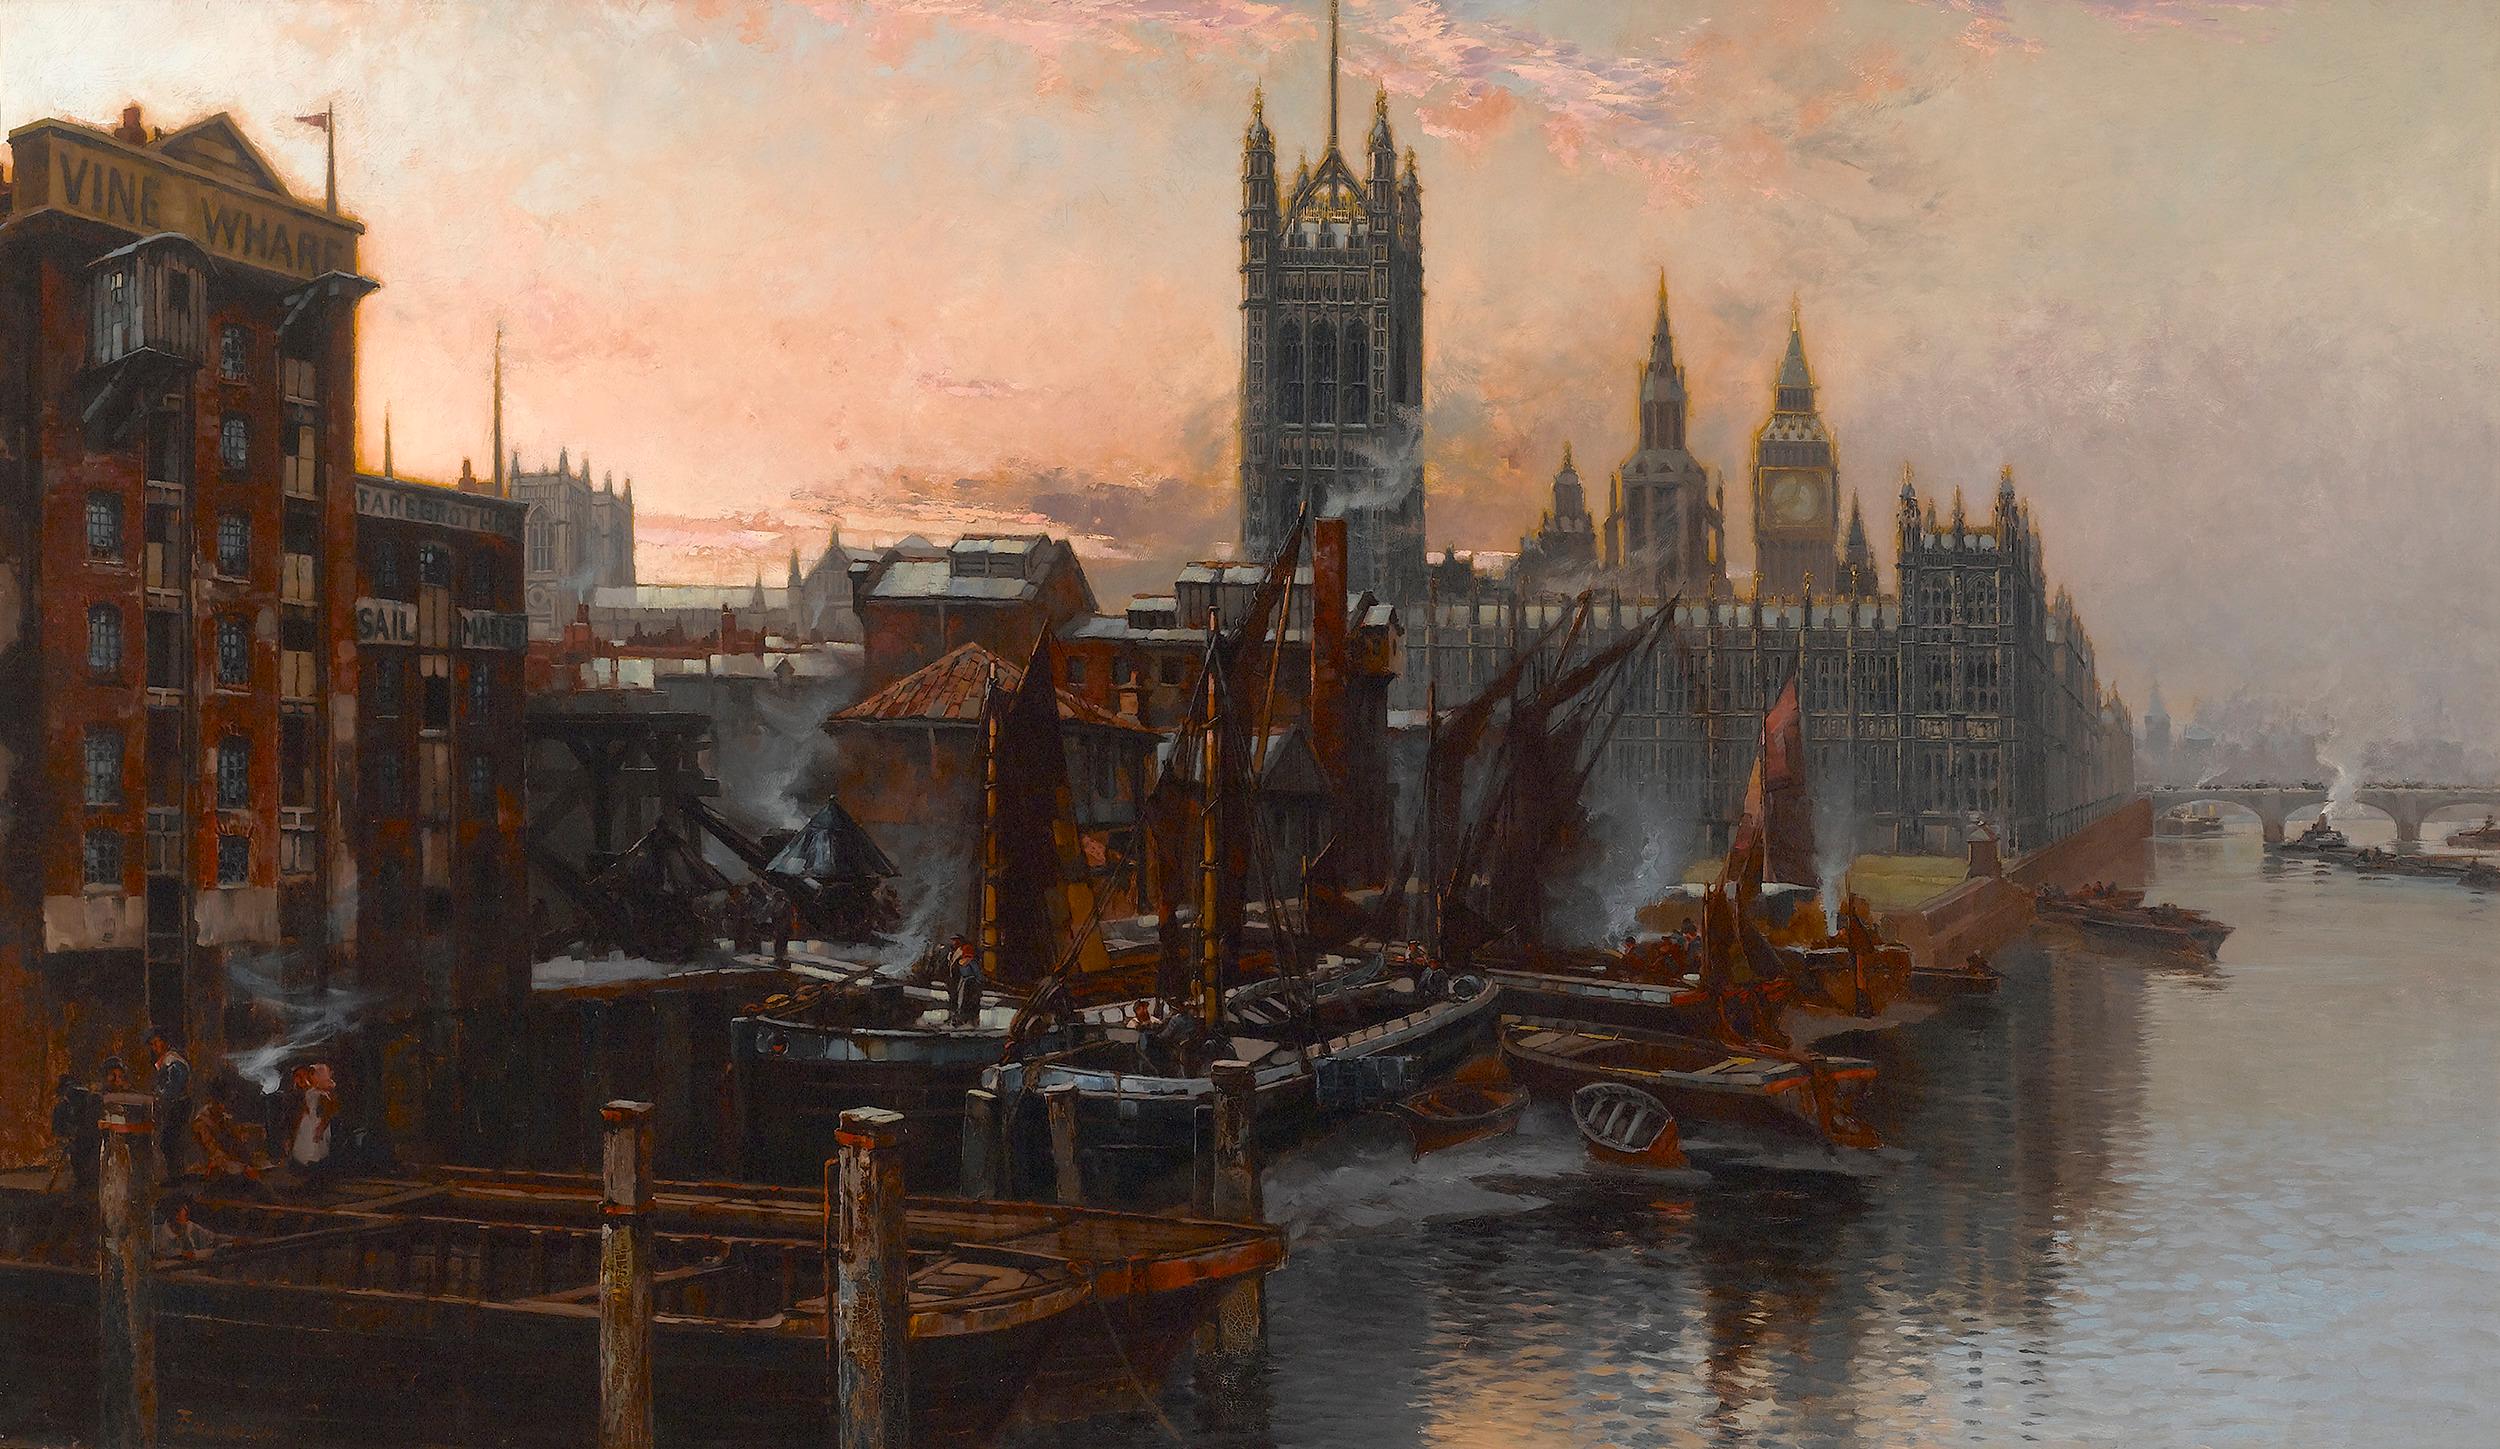 Thomas Greenhalgh Landscape Painting - A View of the Houses of Parliament from the Thames, London